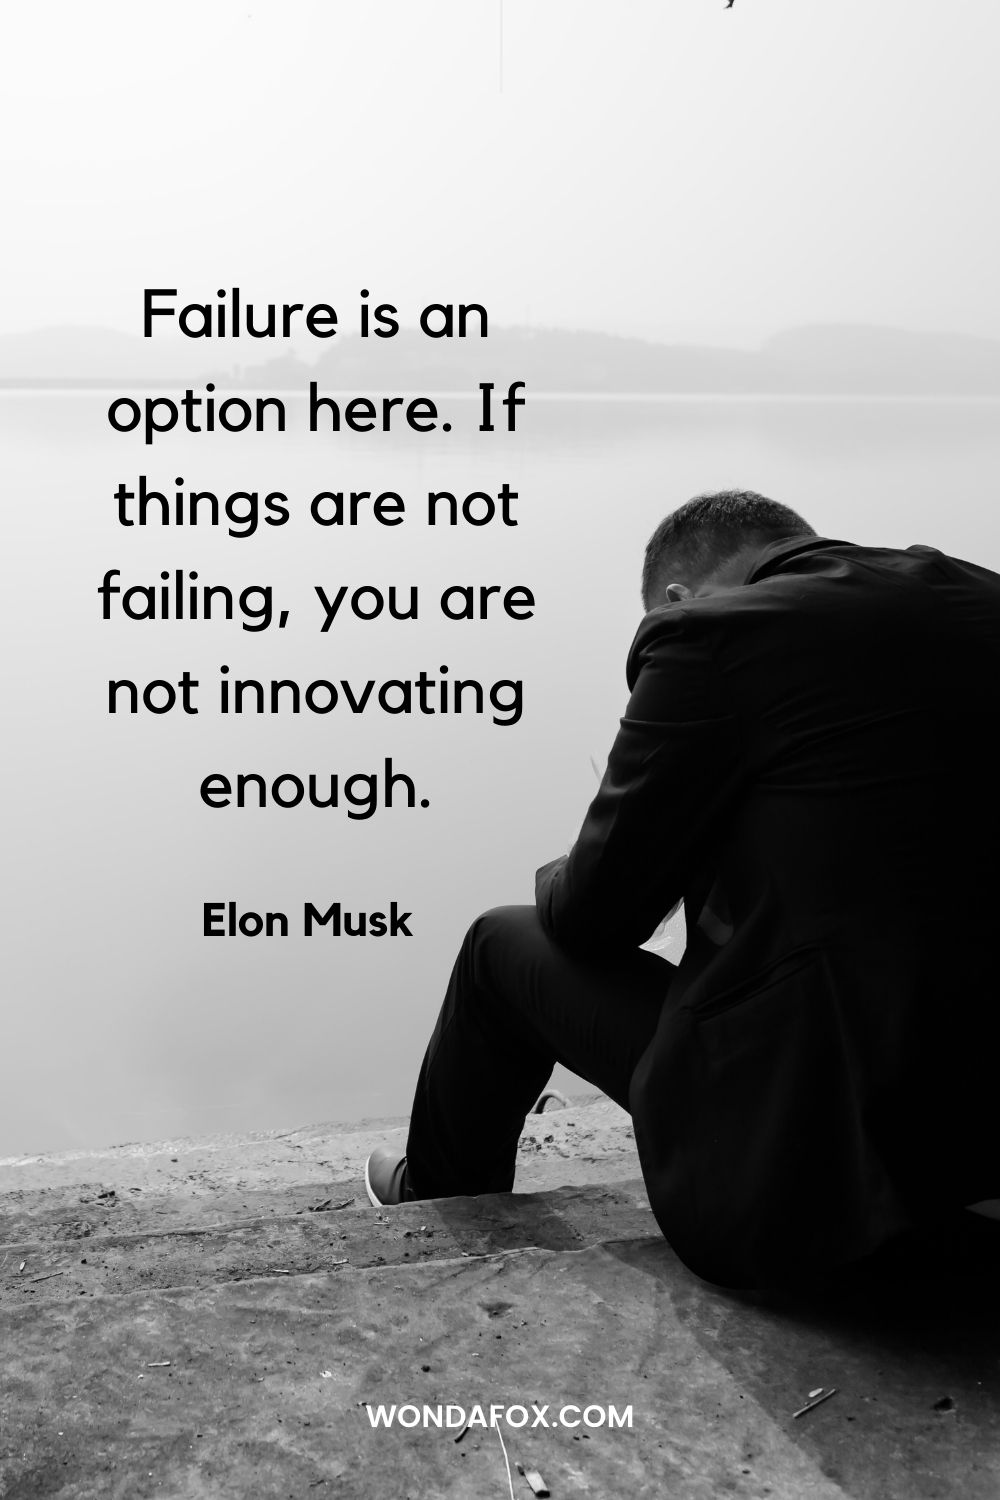 Failure is an option here. If things are not failing, you are not innovating enough. Elon Musk quotes